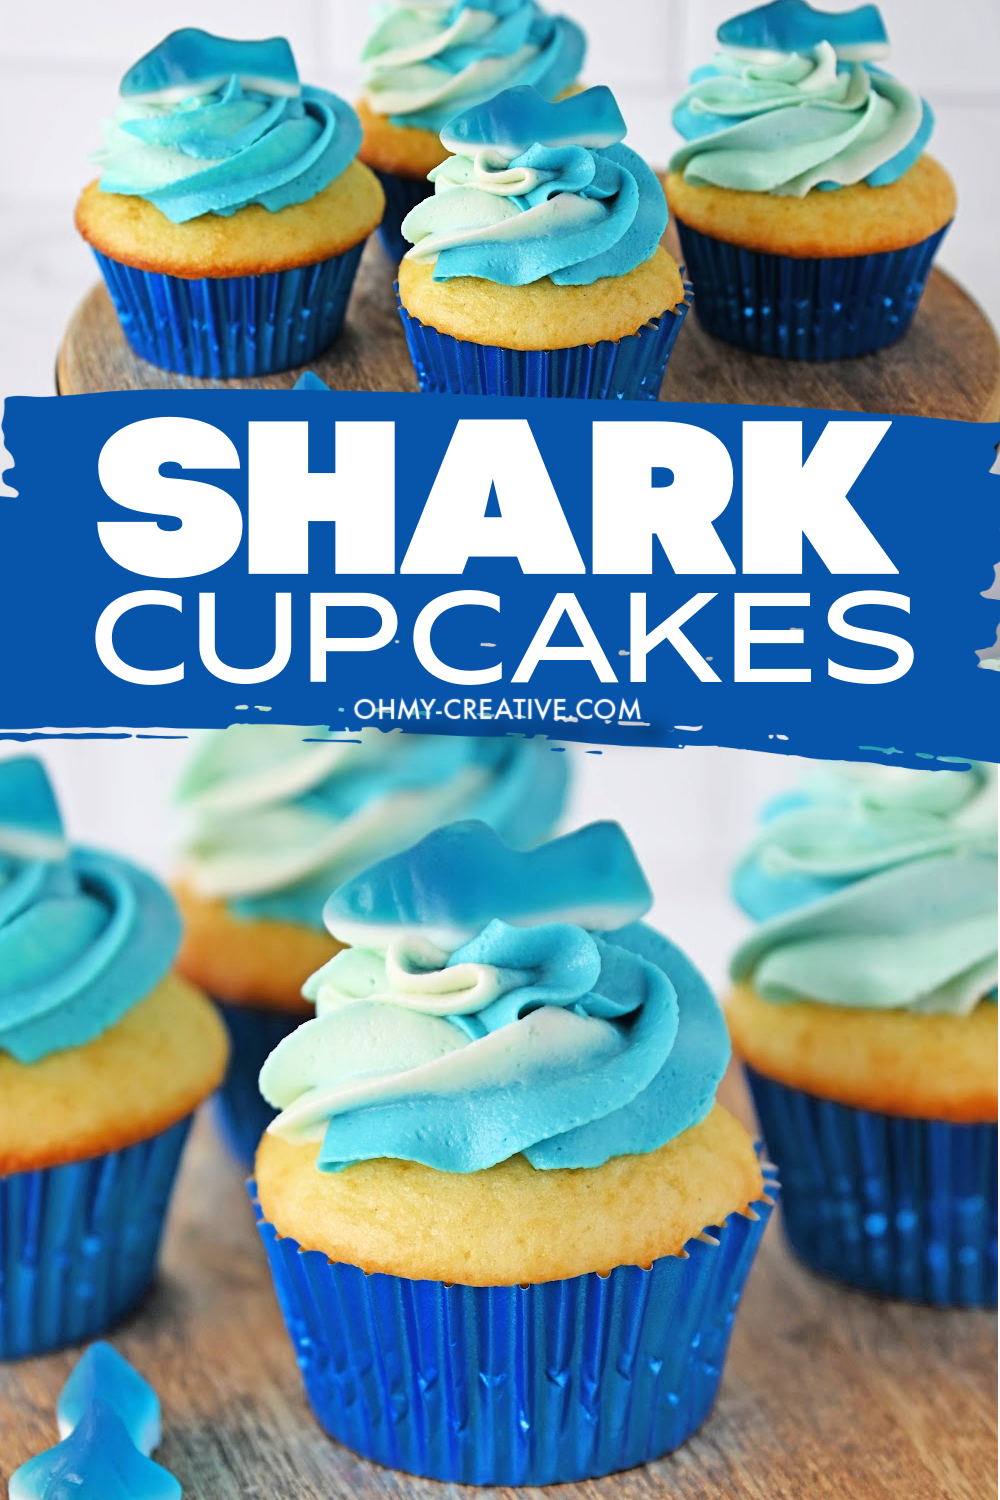 Double image Pinterest image of shark cupcakes using blue ombre icing and a gummy shark on top.